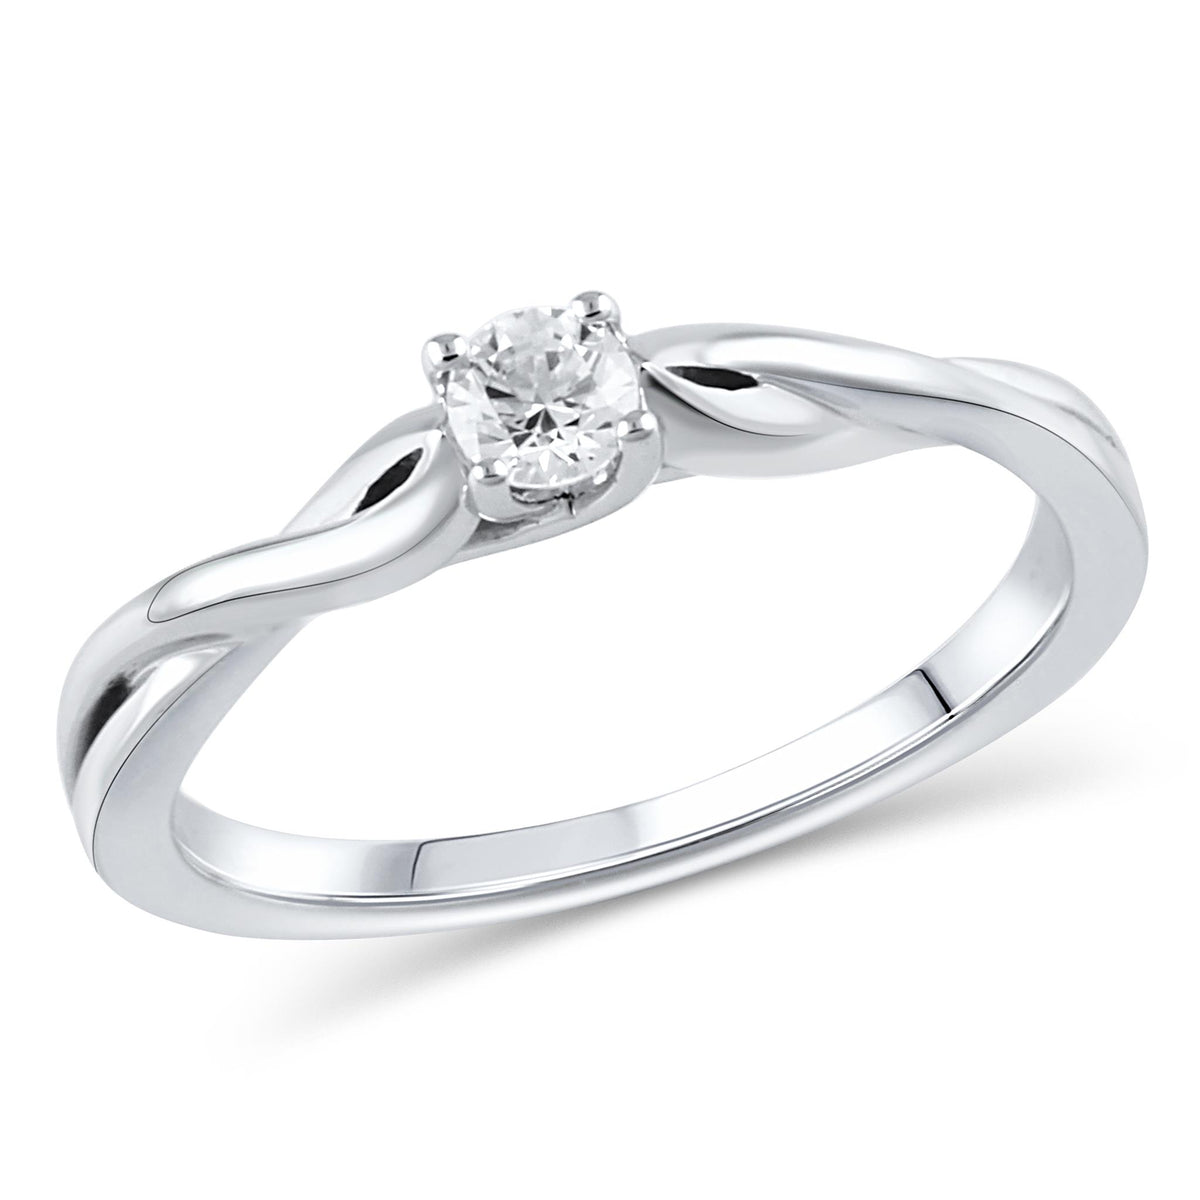 10Kt White Gold Promise Ring With 0.14cttw Natural Diamonds